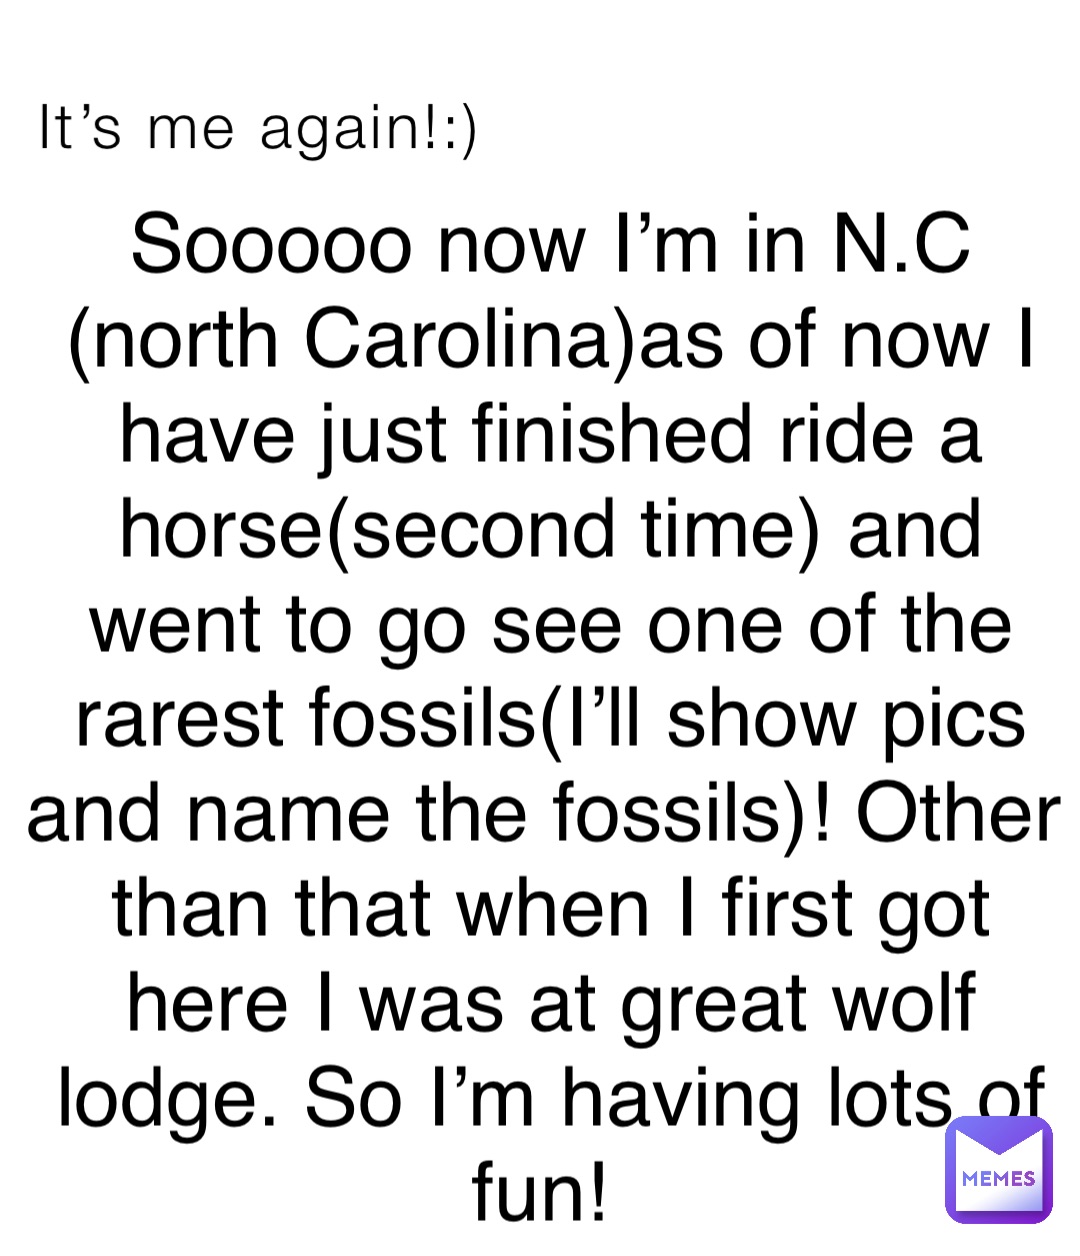 It’s me again!:) Sooooo now I’m in N.C (north Carolina)as of now I have just finished ride a horse(second time) and went to go see one of the rarest fossils(I’ll show pics and name the fossils)! Other than that when I first got here I was at great wolf lodge. So I’m having lots of fun!